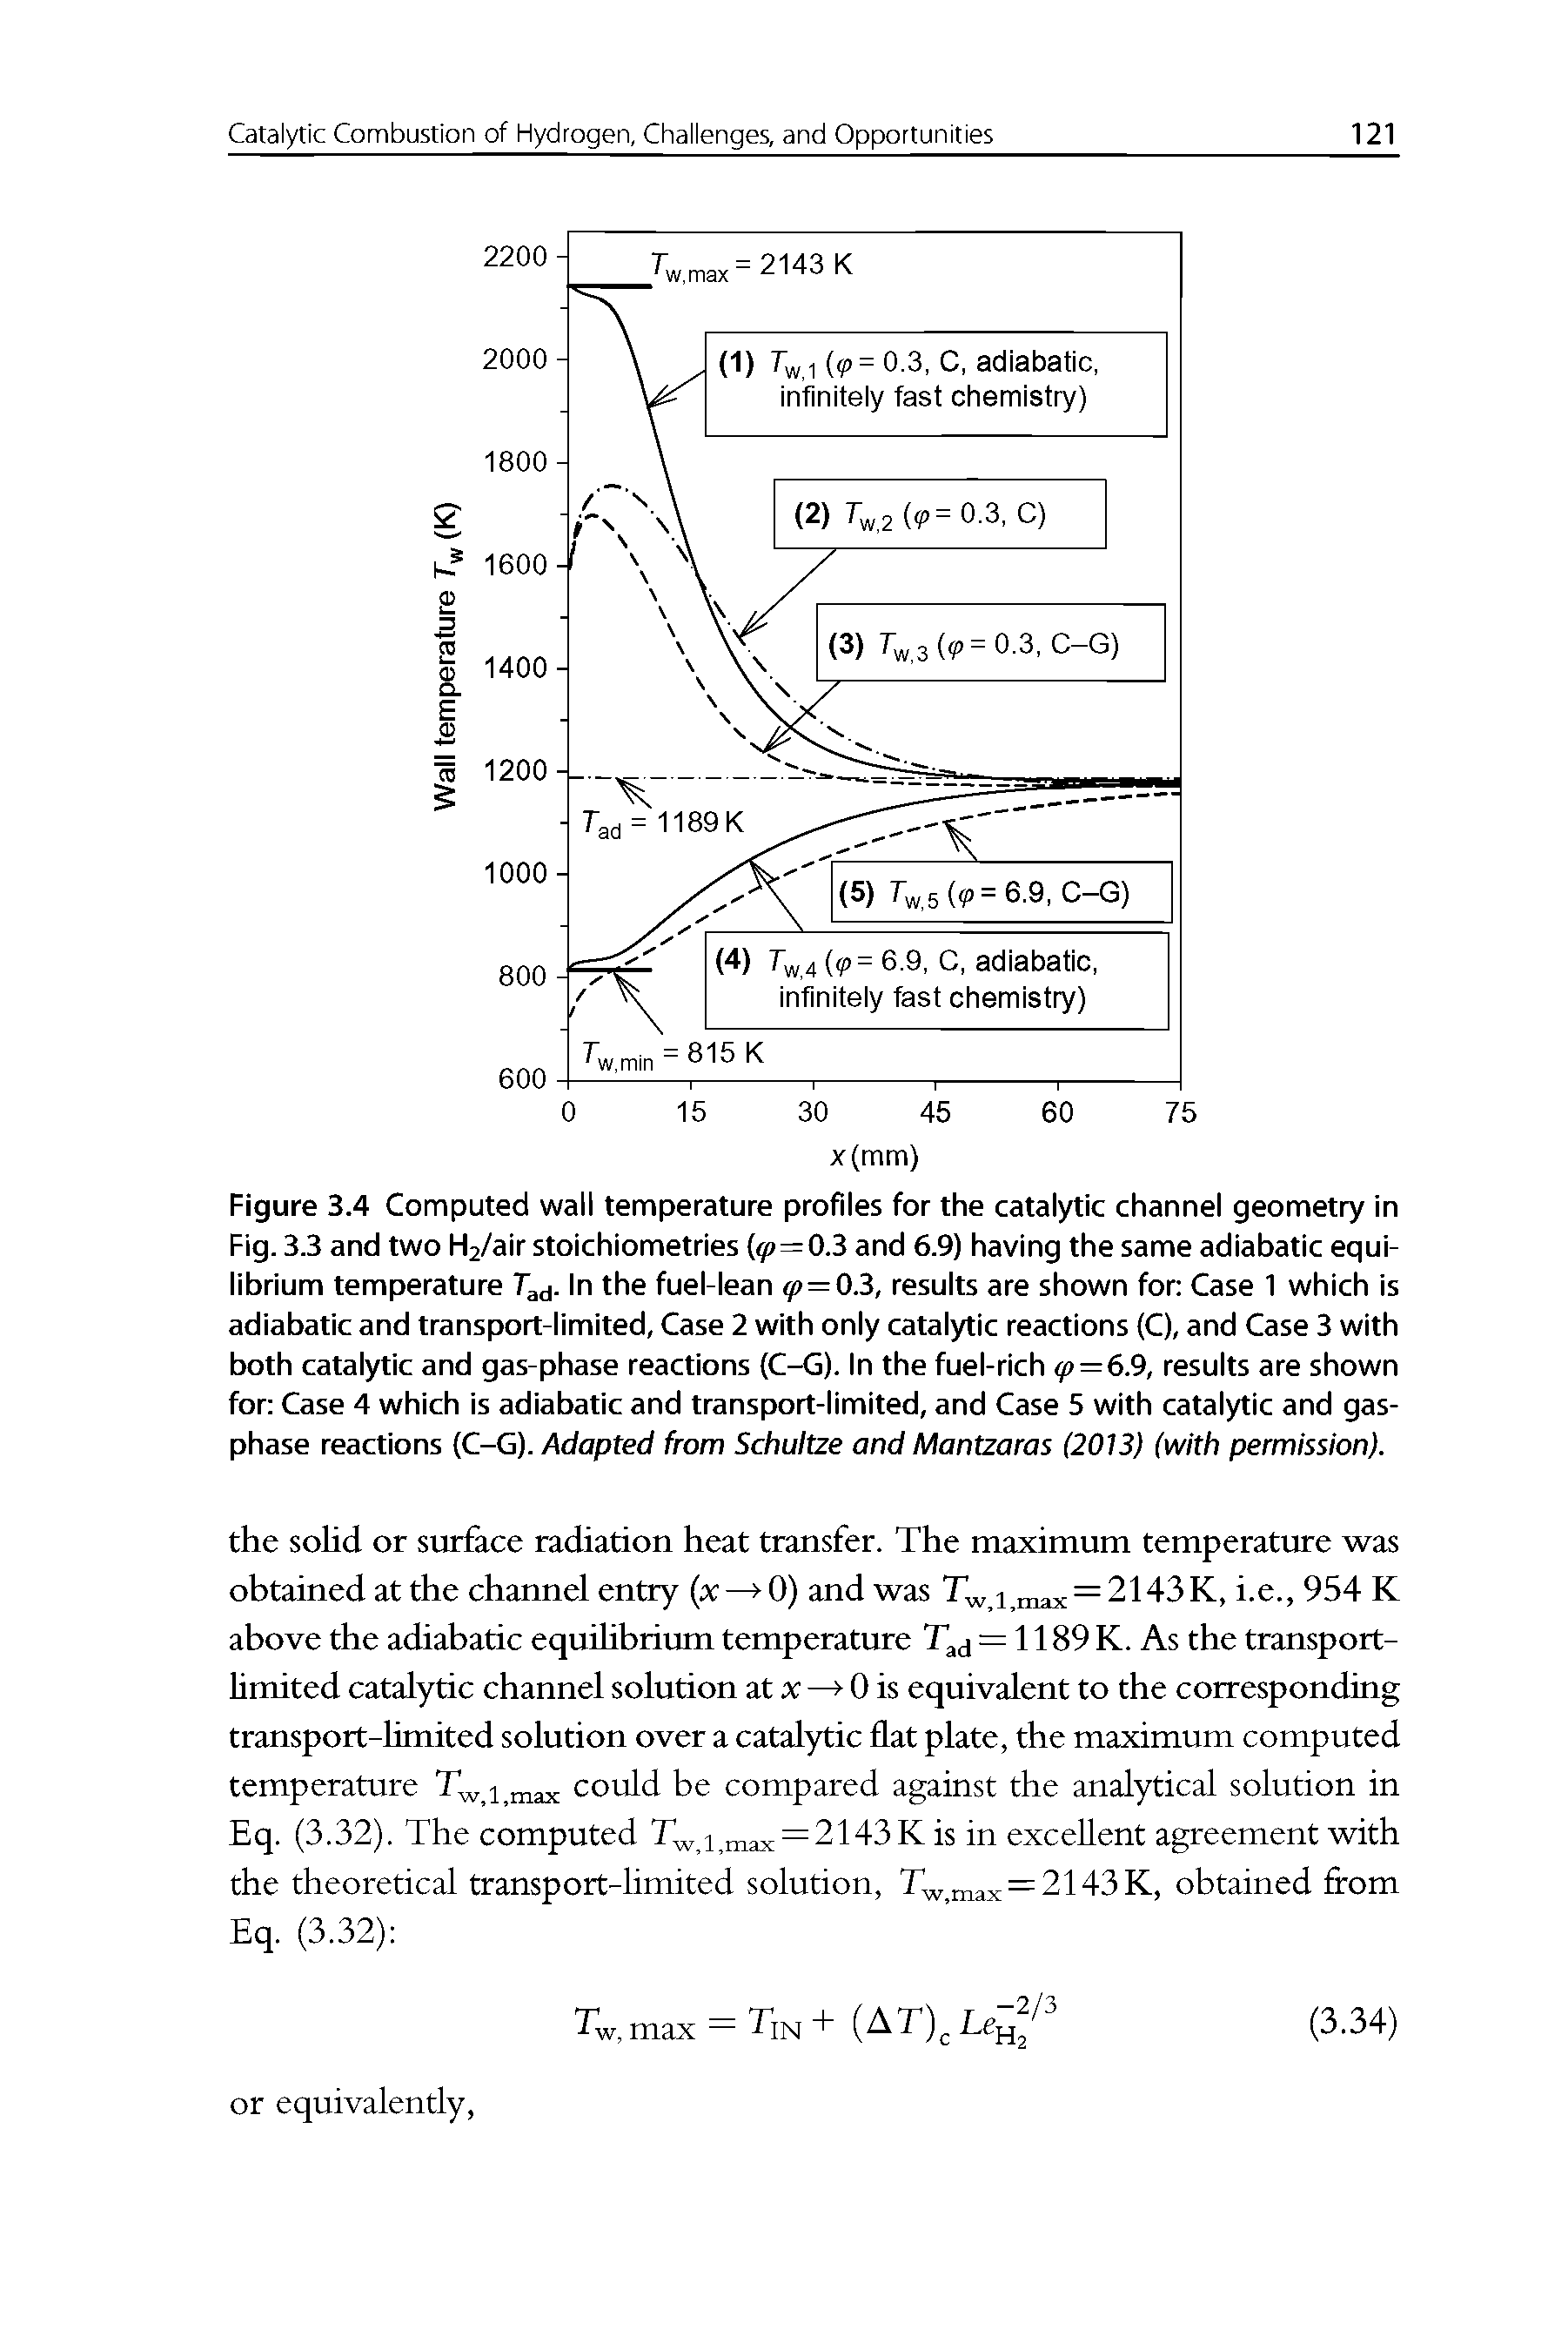 Figure 3.4 Computed wall temperature profiles for the catalytic channel geometry in Fig. 3.3 and two H2/air stoichiometries =0.3 and 6.9) having the same adiabatic equilibrium temperature Tad. In the fuel-lean =0.3, results are shown for Case 1 which is adiabatic and transport-limited, Case 2 with only catalytic reactions (C), and Case 3 with both catalytic and gas-phase reactions (C-G). In the fuel-rich <p=6.9, results are shown for Case 4 which is adiabatic and transport-limited, and Case 5 with catalytic and gas-phase reactions C-G). Adapted from Scbultze and Mantzaras (2013) (with permission).